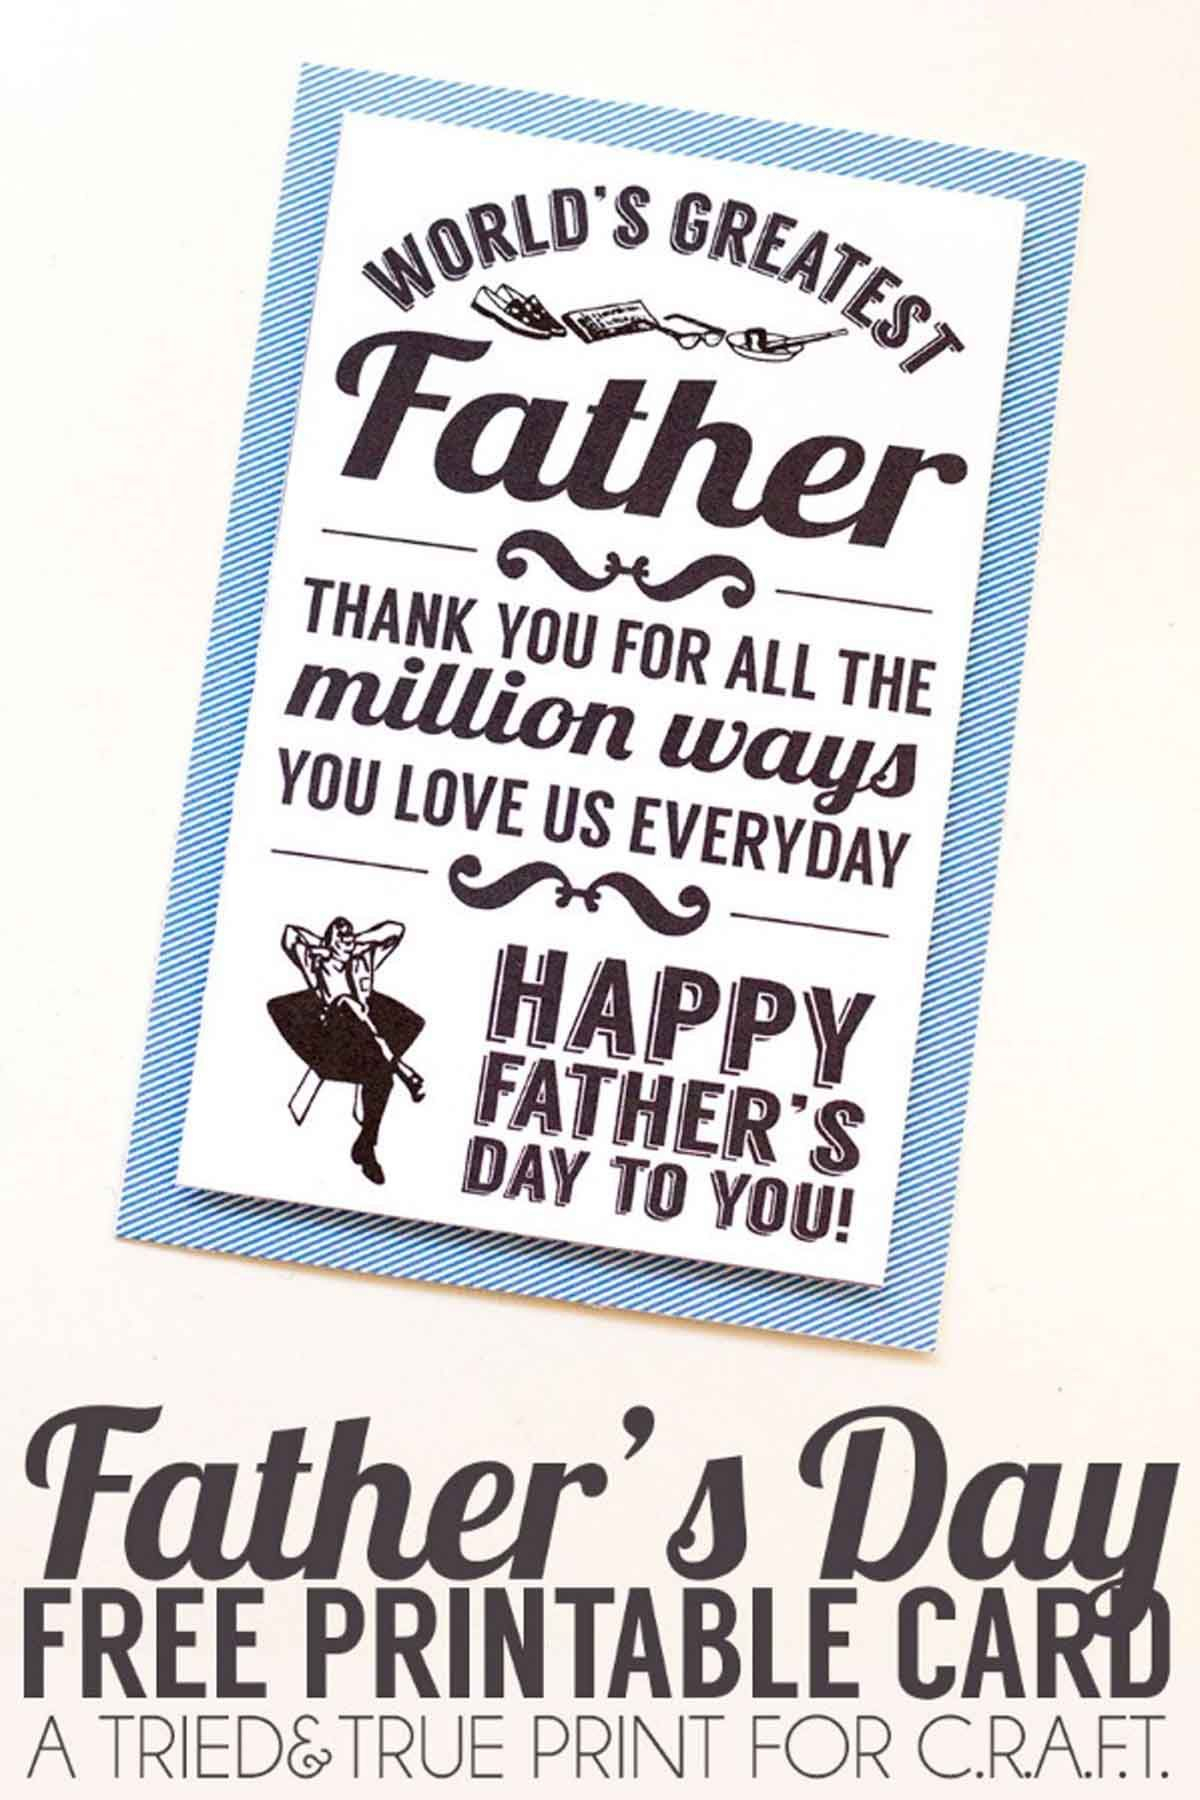 16 Fun And Free Printable Father&amp;#039;s Day Cards | Perfect Gift - Free Printable Father&amp;amp;#039;s Day Card From Wife To Husband